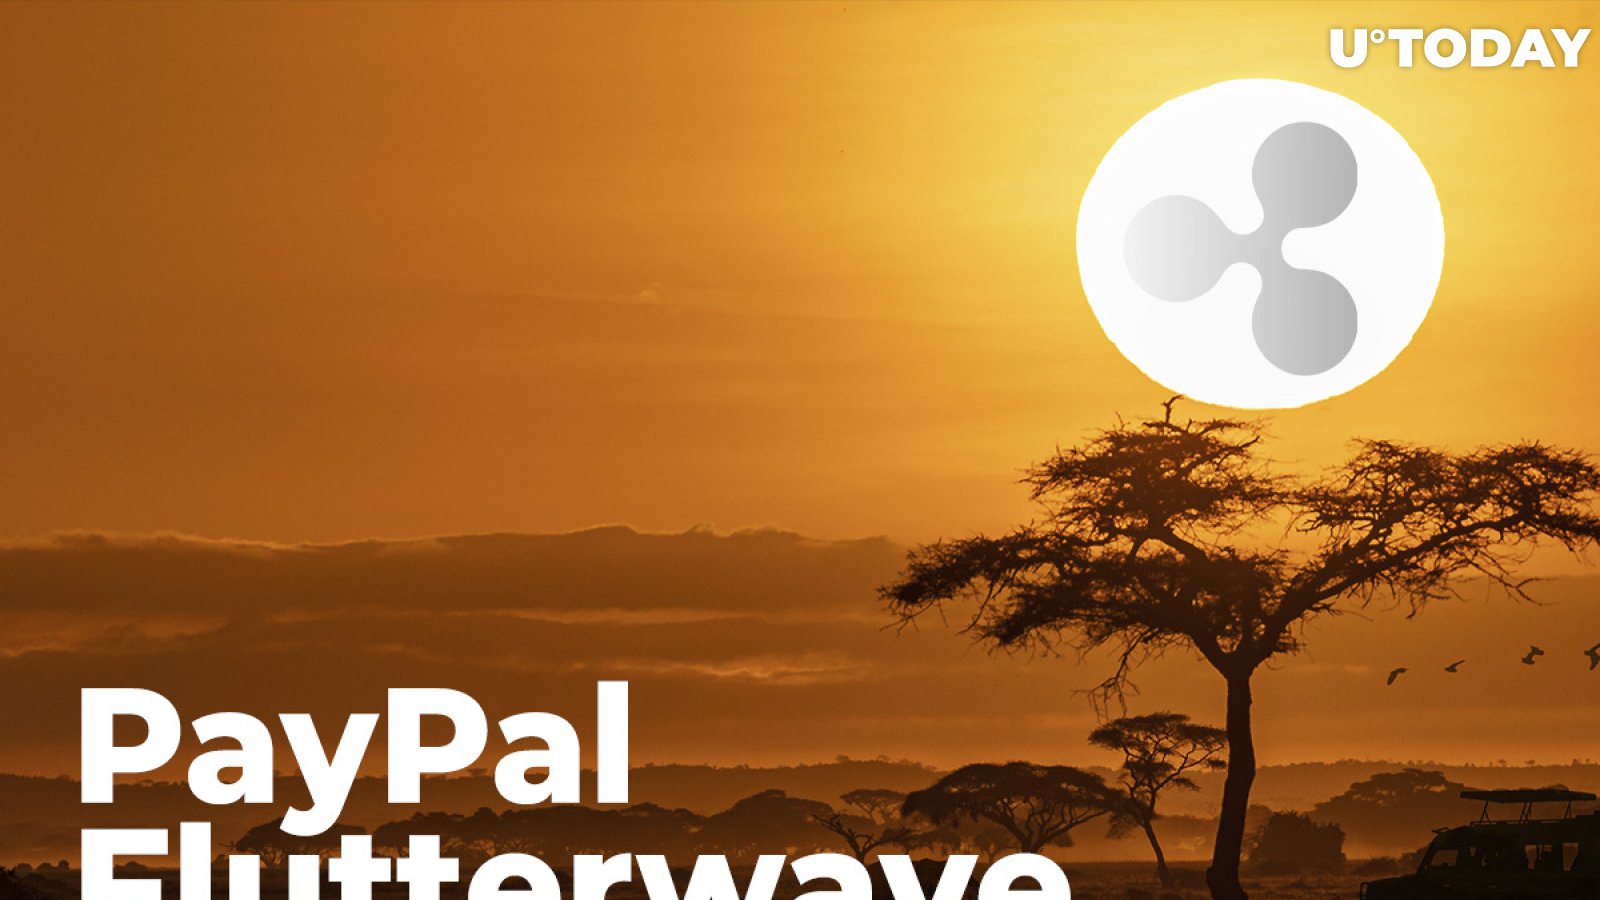 PayPal and Ripple Client Flutterwave Cut Fees for Cross-Border Payments in Africa